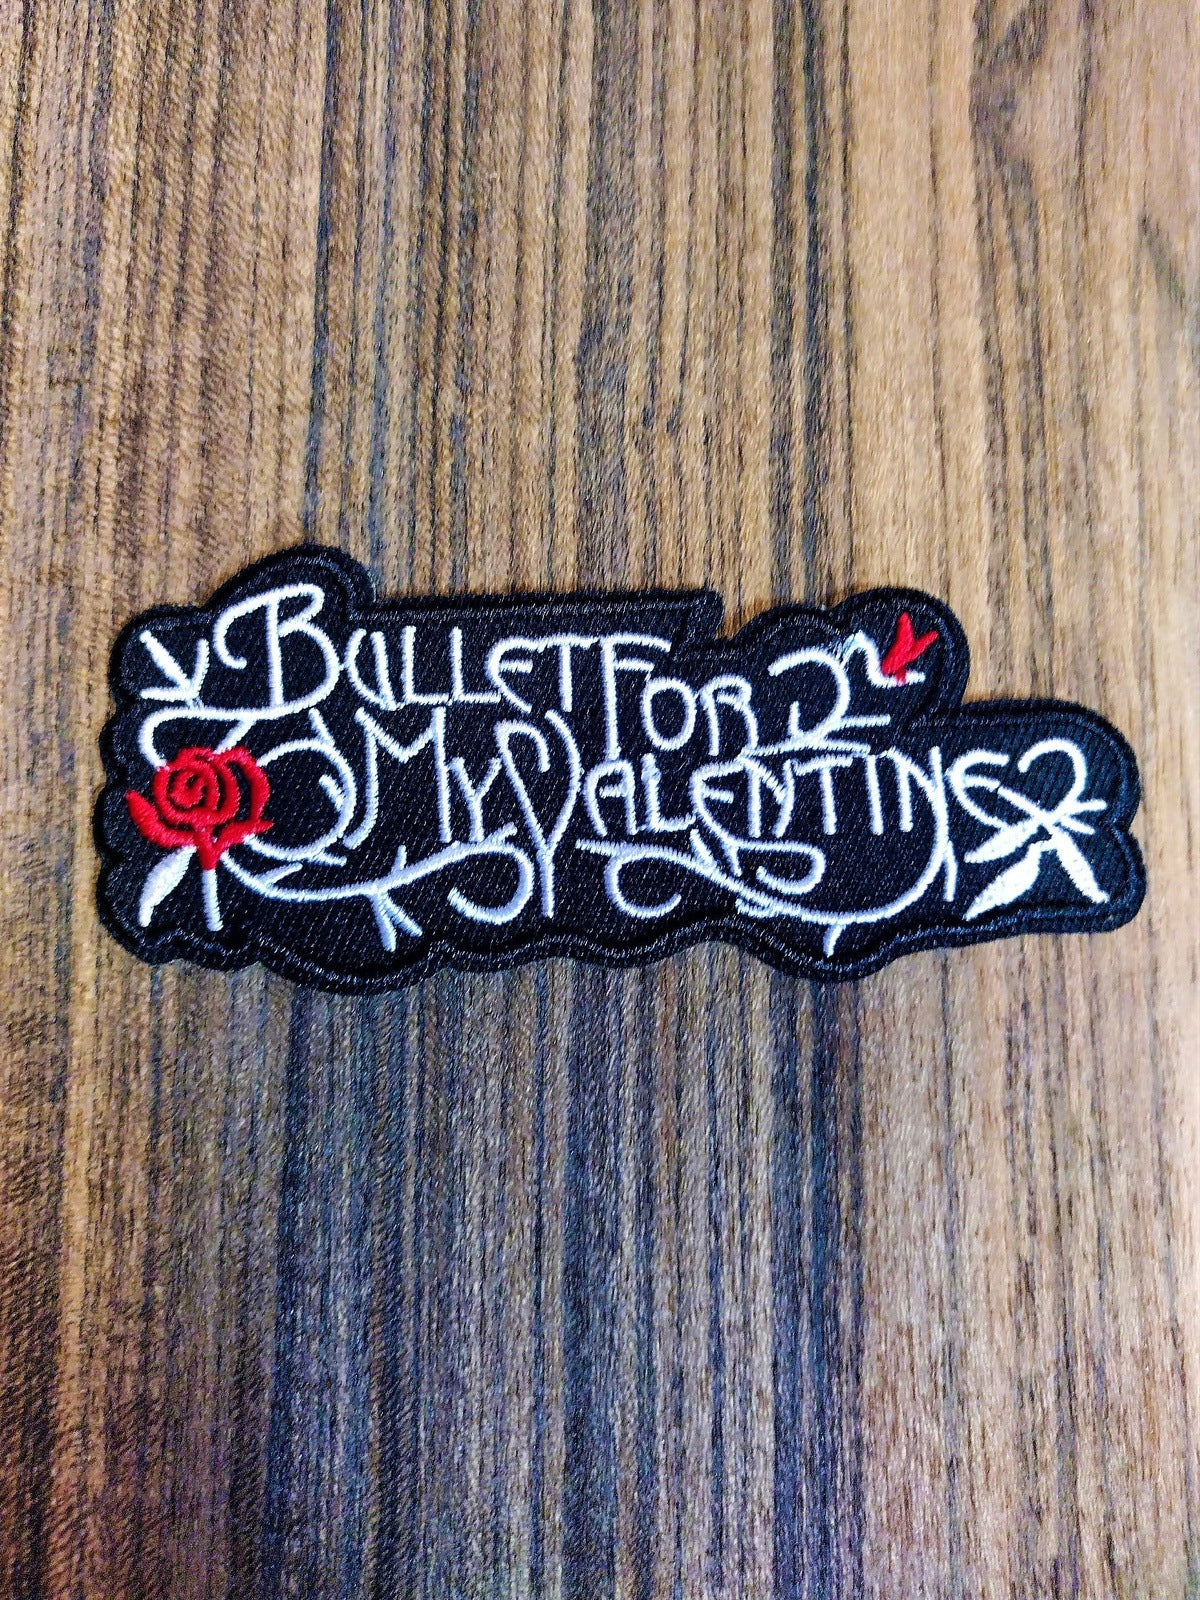 Bullet for my Valentine Patch approx. 4 inches